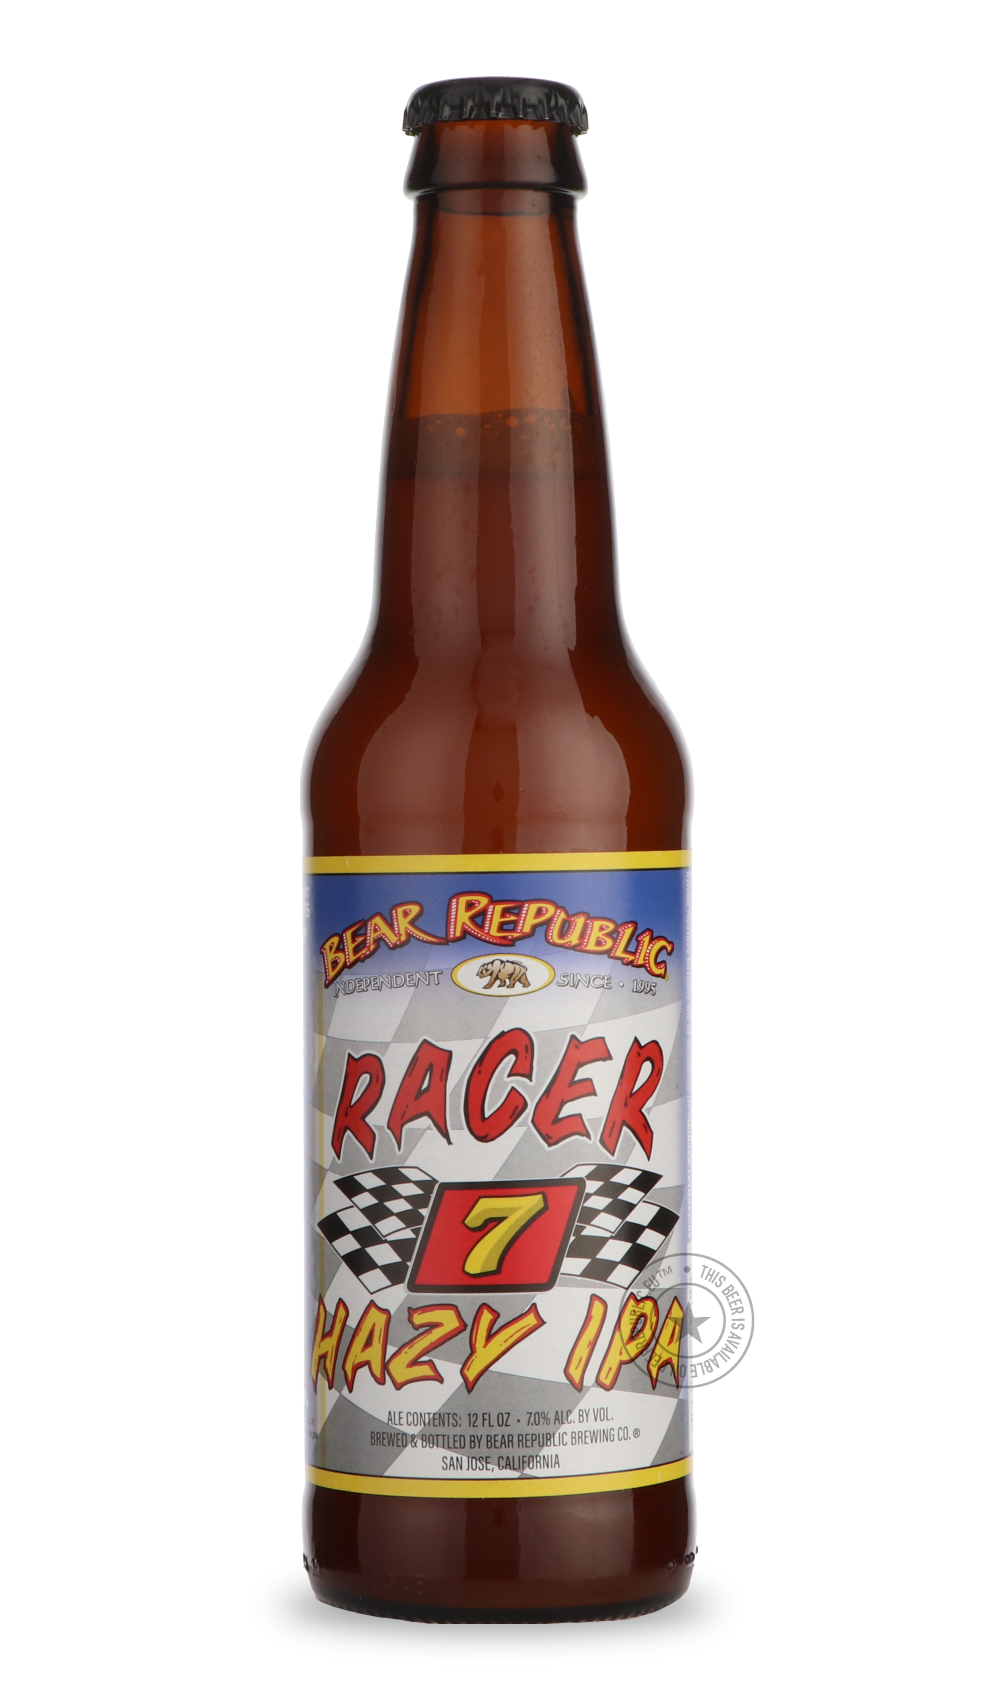 -Bear Republic- Racer 7-IPA- Only @ Beer Republic - The best online beer store for American & Canadian craft beer - Buy beer online from the USA and Canada - Bier online kopen - Amerikaans bier kopen - Craft beer store - Craft beer kopen - Amerikanisch bier kaufen - Bier online kaufen - Acheter biere online - IPA - Stout - Porter - New England IPA - Hazy IPA - Imperial Stout - Barrel Aged - Barrel Aged Imperial Stout - Brown - Dark beer - Blond - Blonde - Pilsner - Lager - Wheat - Weizen - Amber - Barley Wi